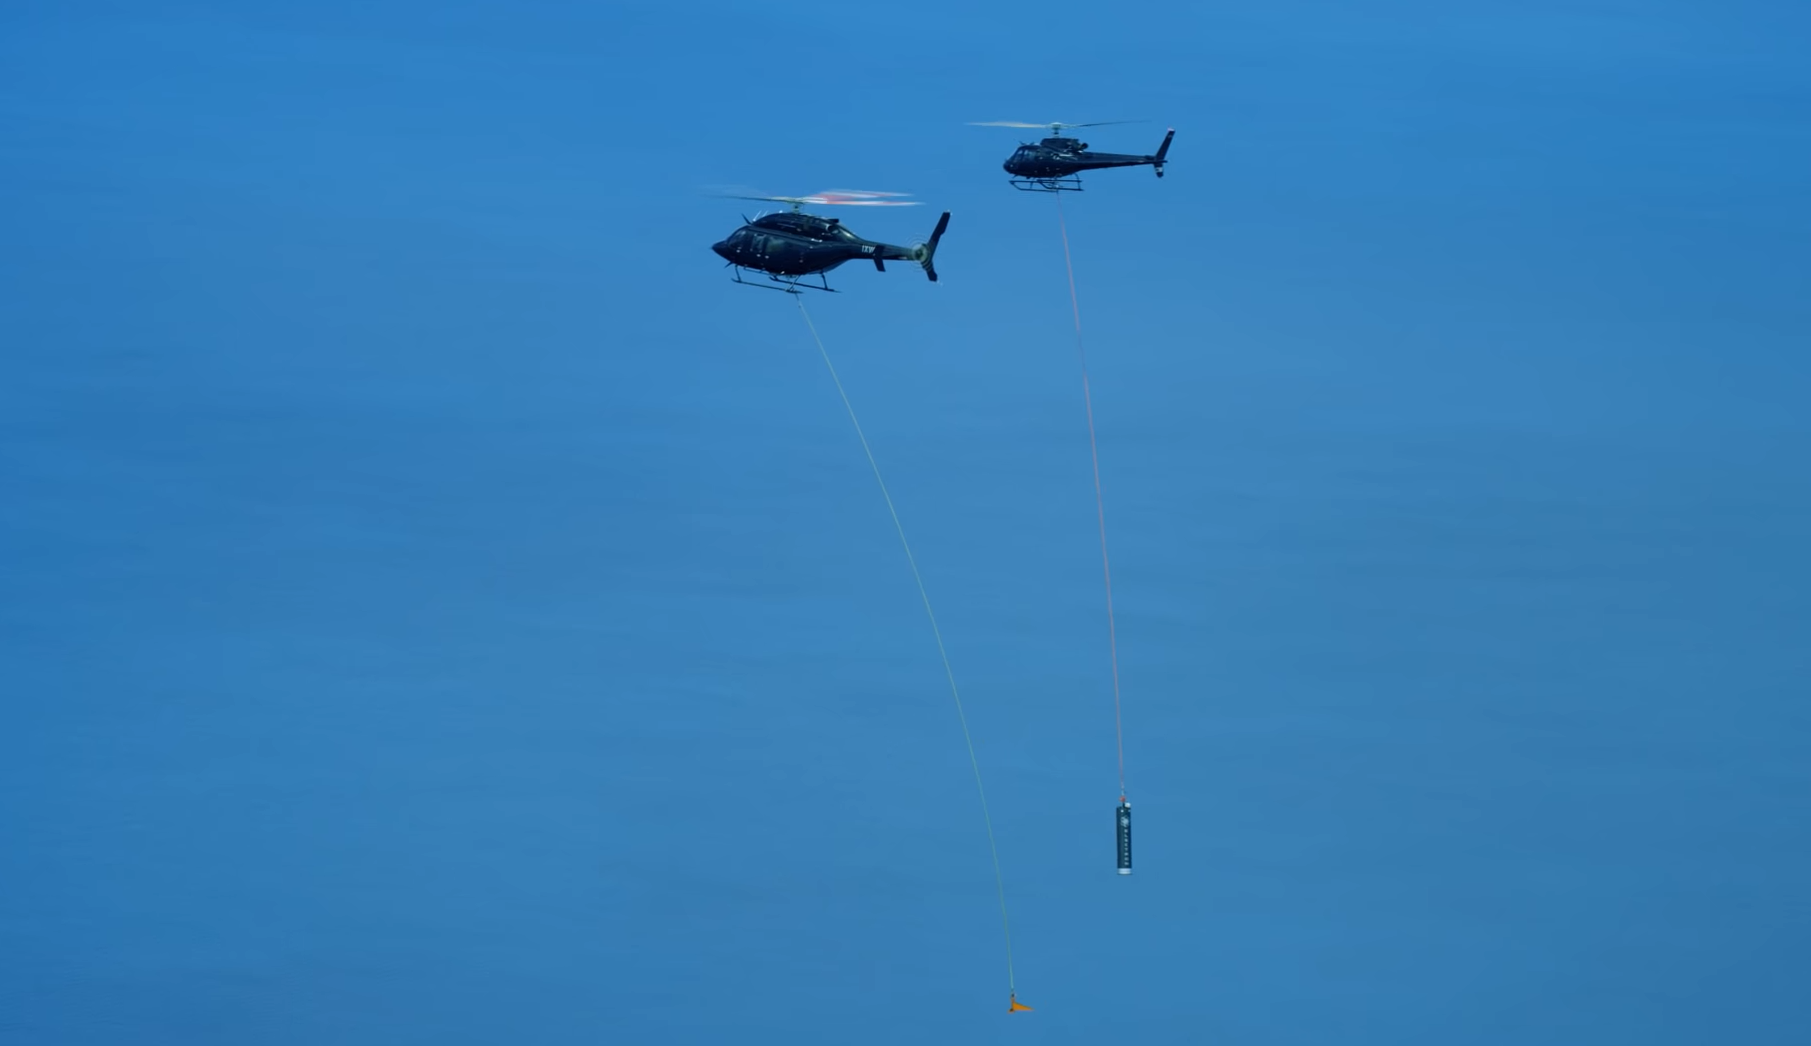 Helicopter ready to capture boosters and parachutes